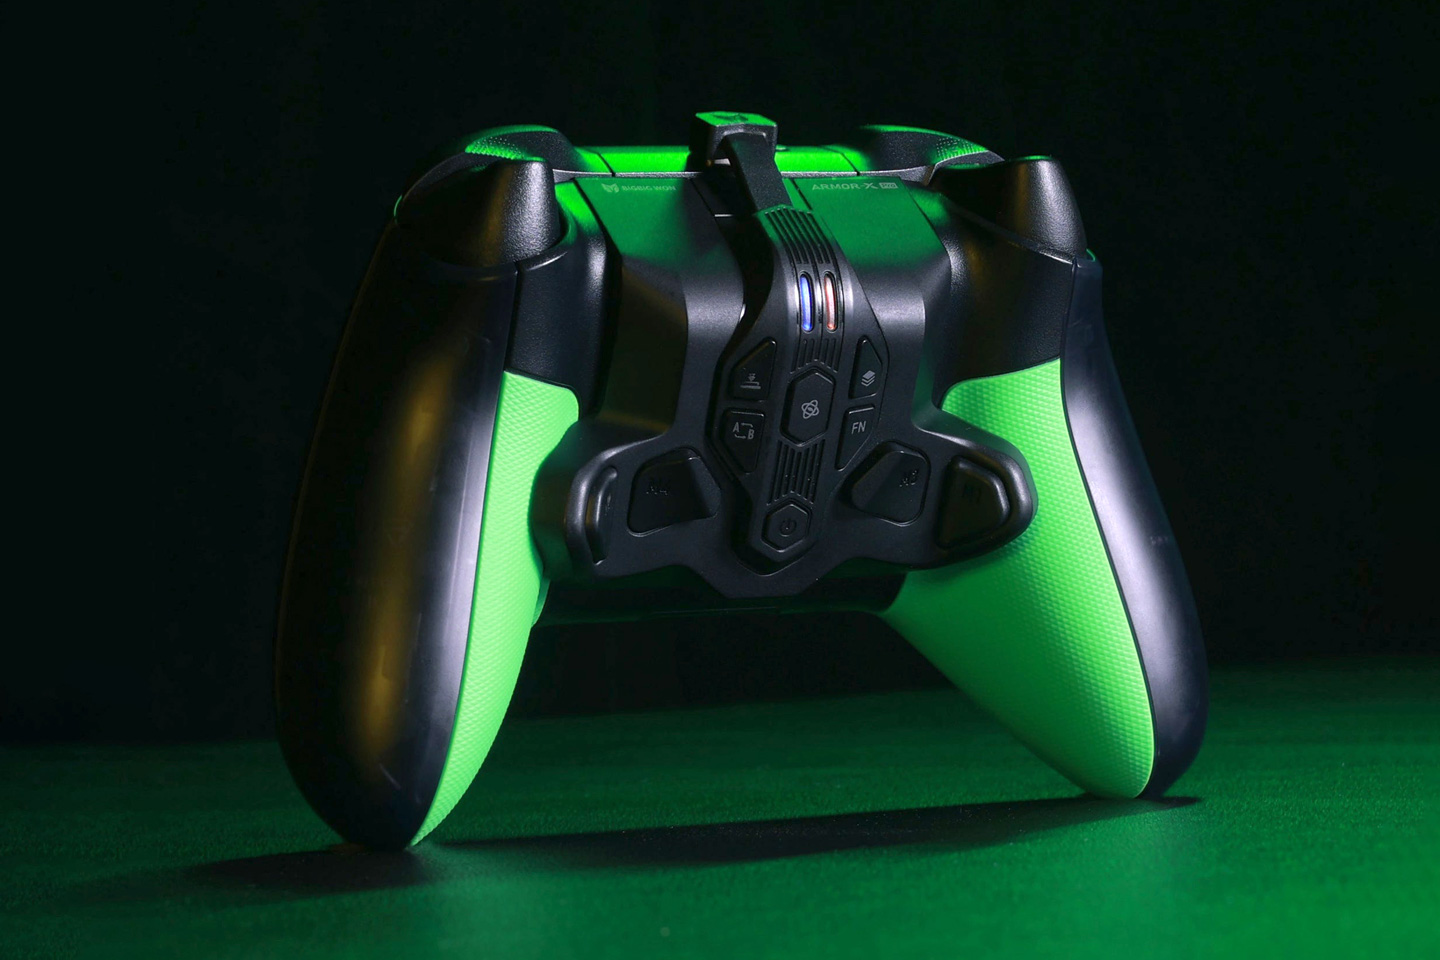 #This Xbox controller accessory adds extra buttons to the back, upgrading it to an Elite Controller